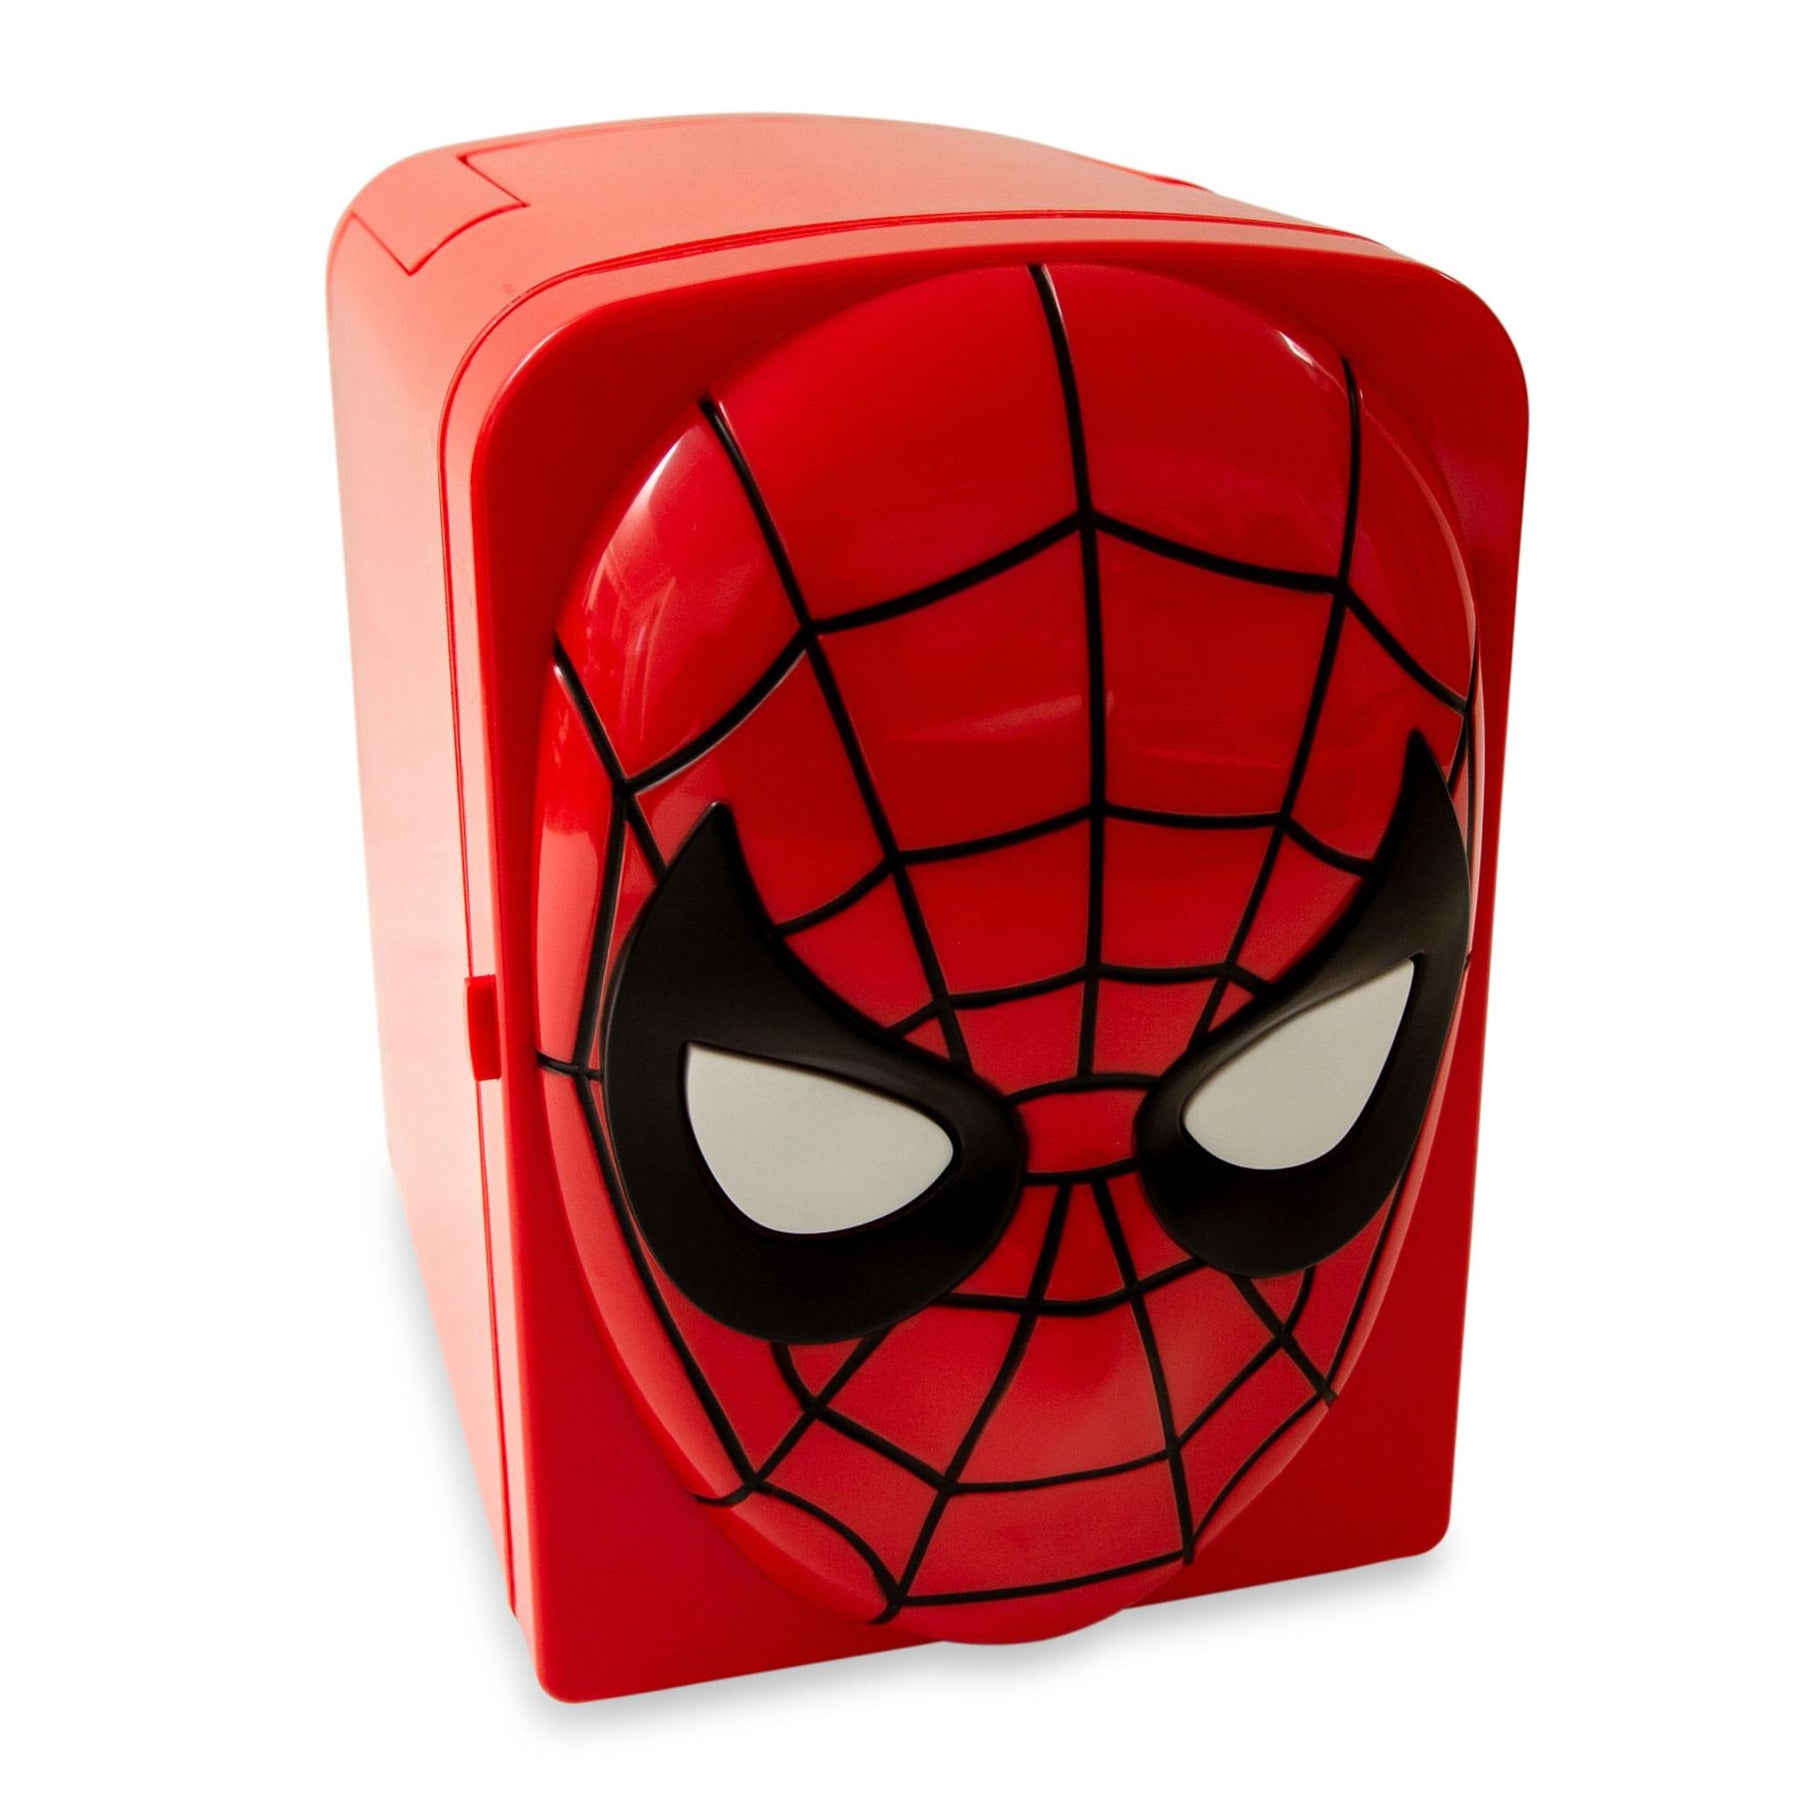 Marvel Spider-Man 4-Liter Mini Fridge Thermoelectric Cooler | Holds 6 Cans